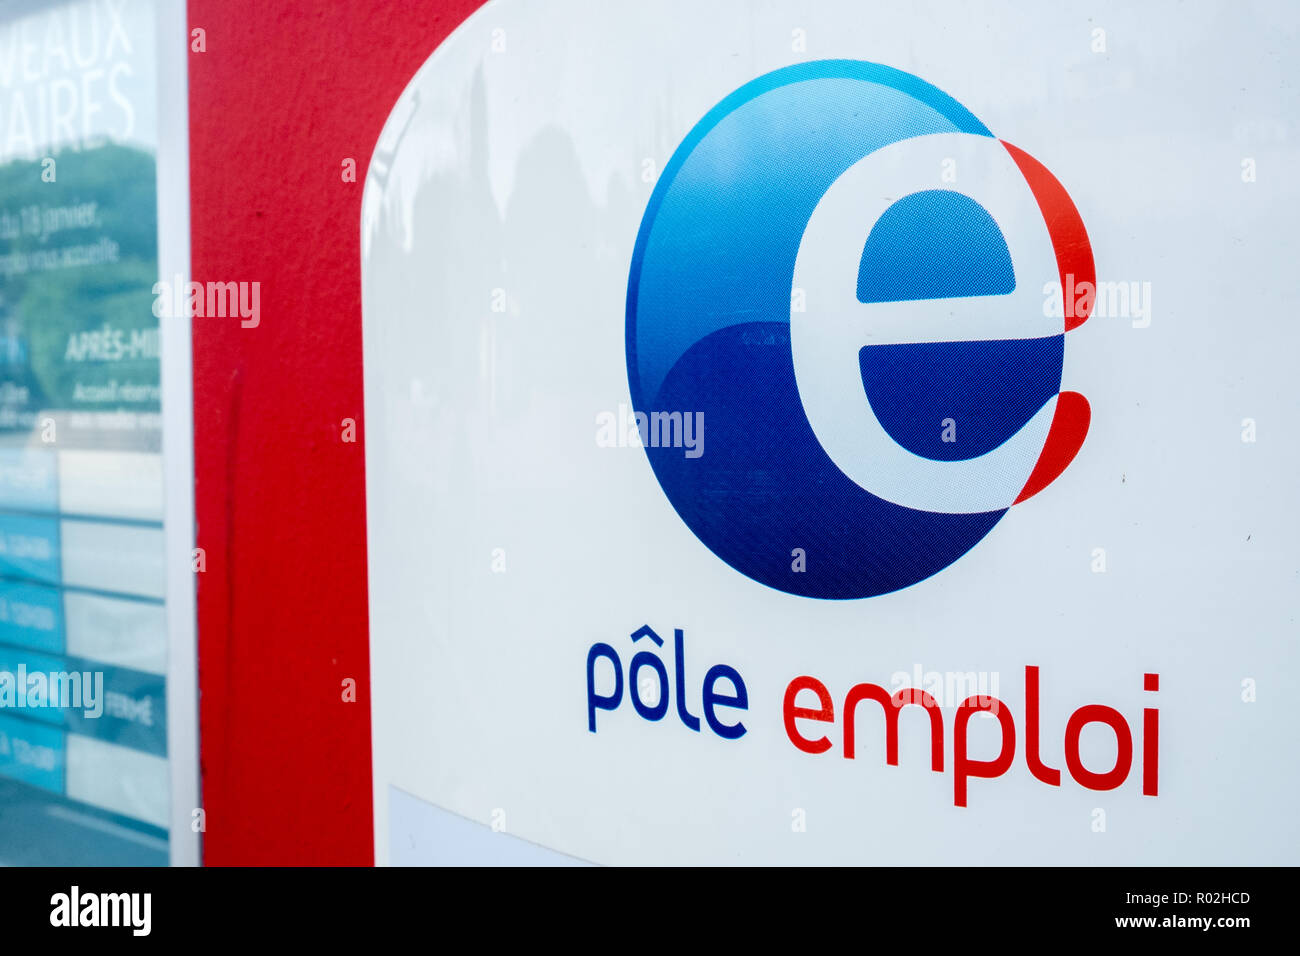 Pole Emploi High Resolution Stock Photography and Images - Alamy